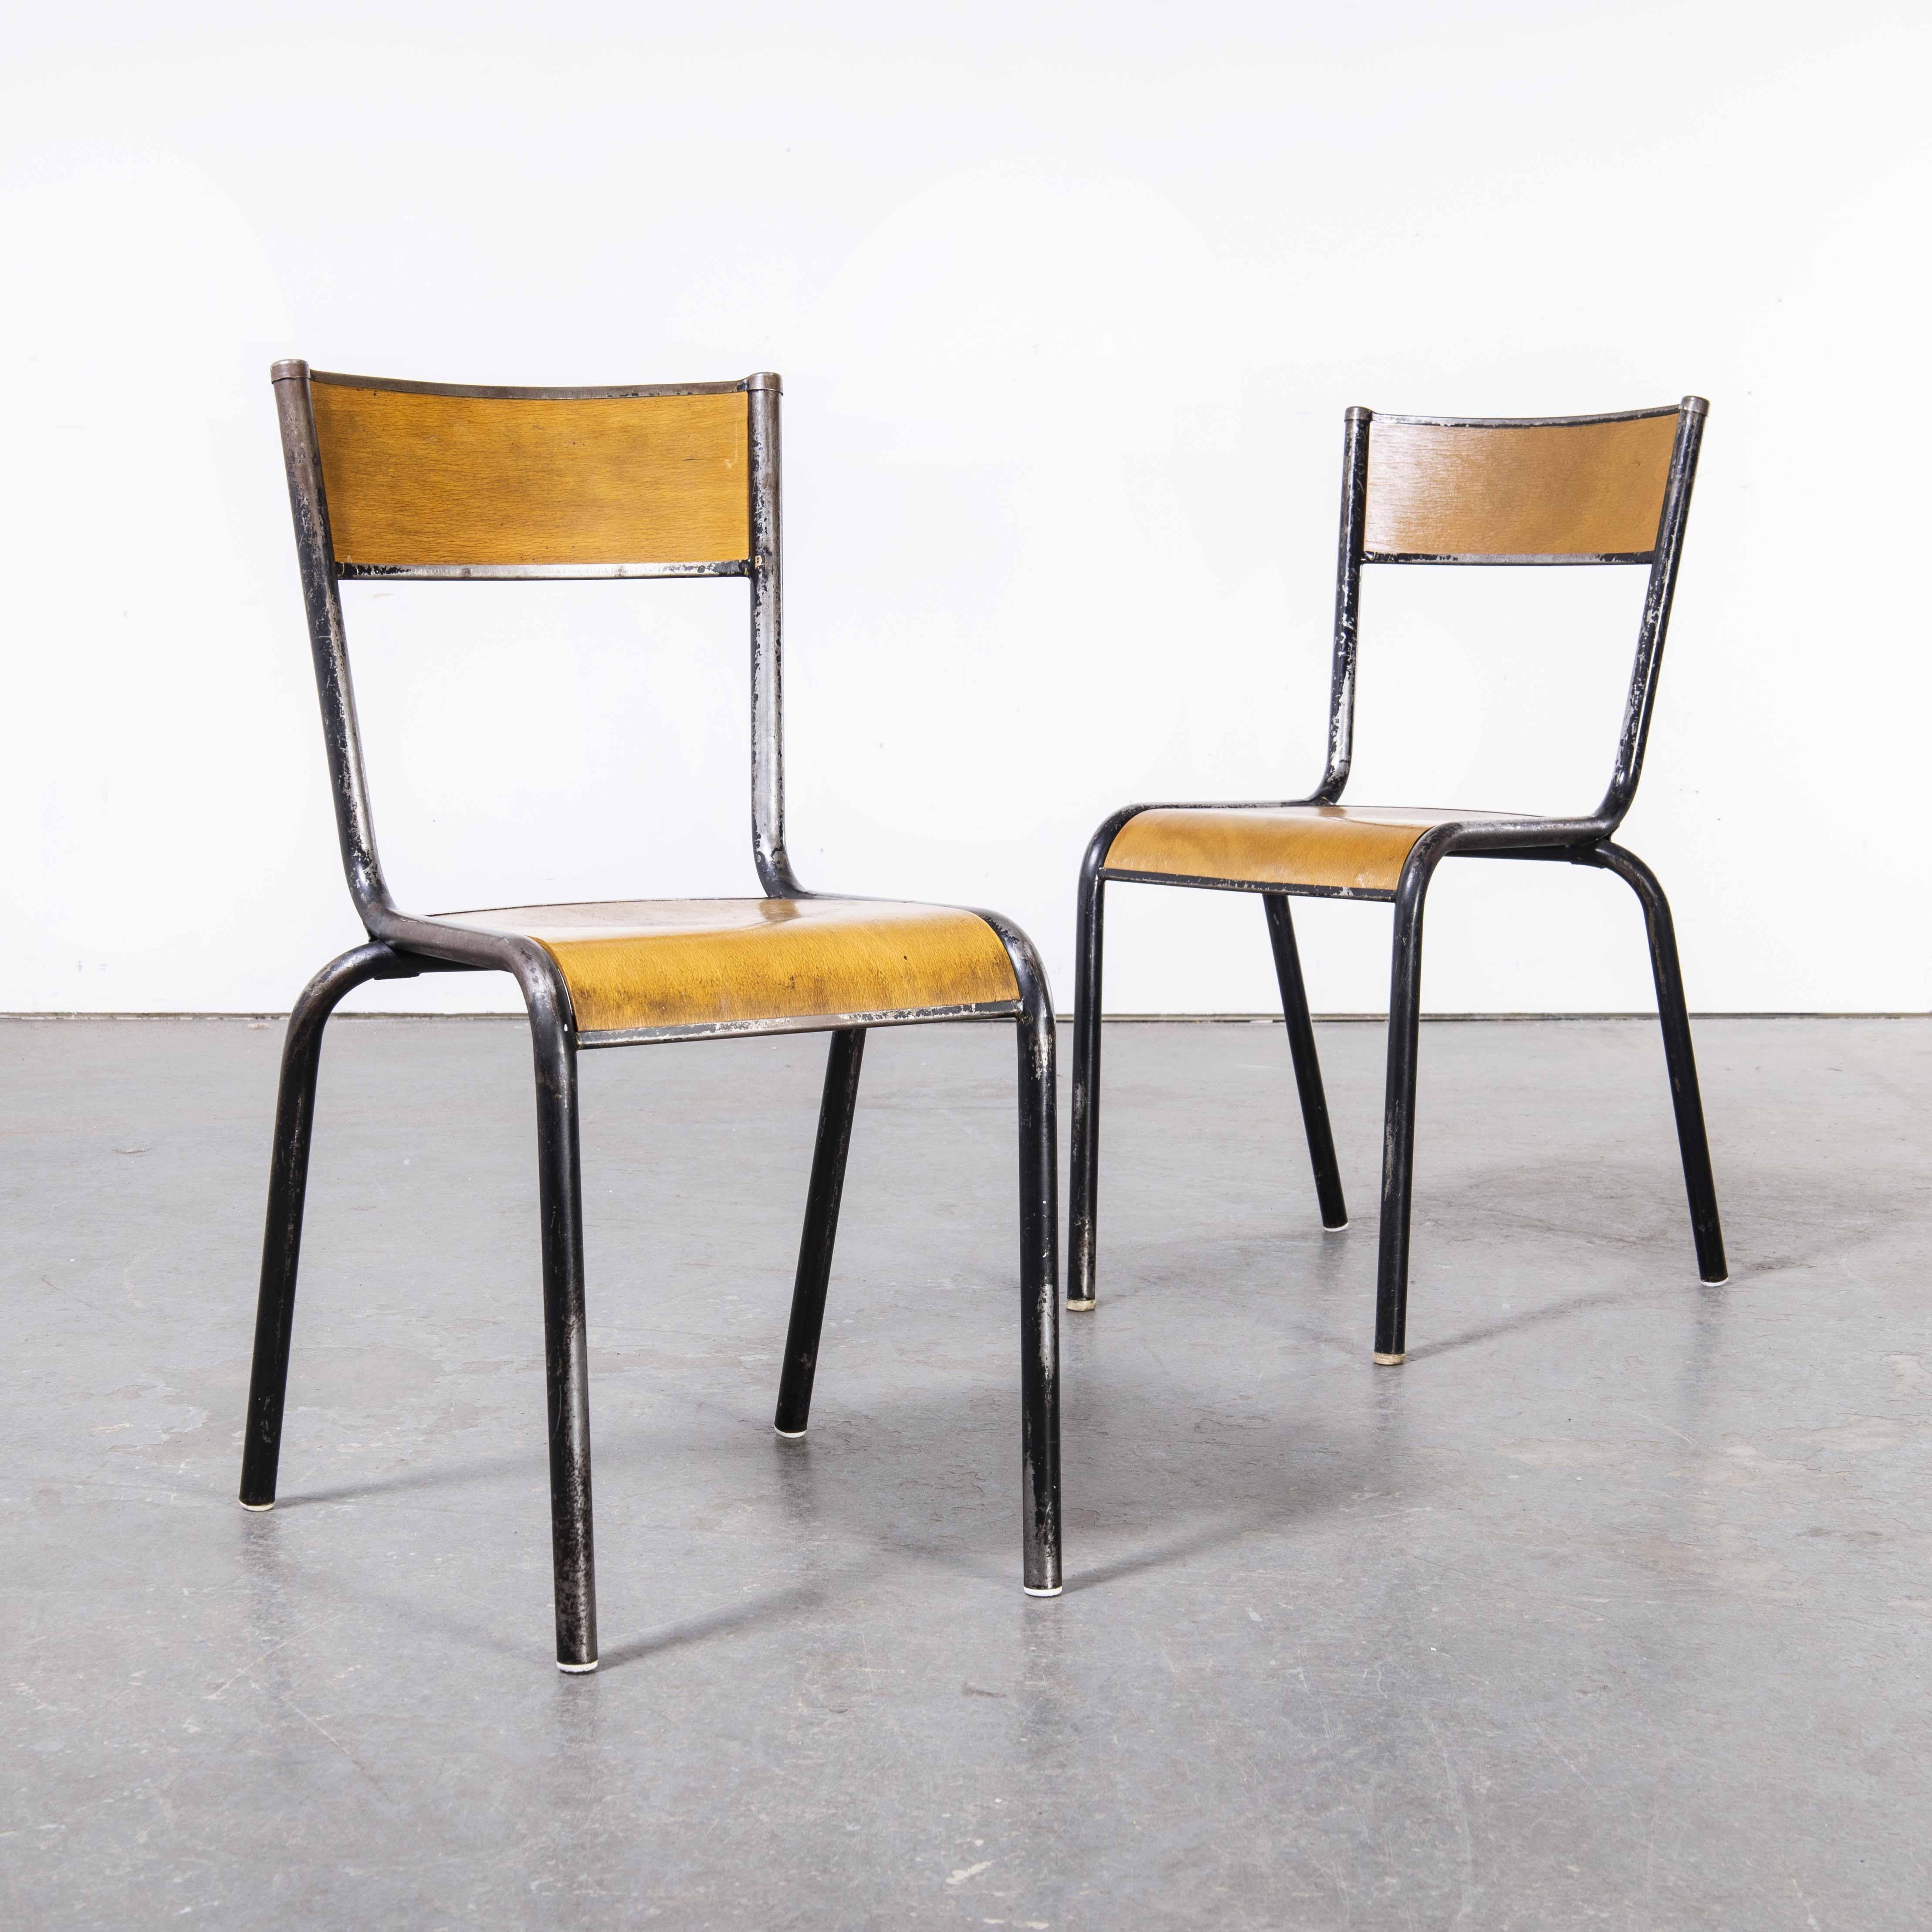 1960’s French Mullca stacking chair – black frame – pair
1960’s French Mullca stacking chair – black frame – pair. One of our most favourite chairs, in 1947 Robert Muller and Gaston Cavaillon created the company that went on to develop arguably the